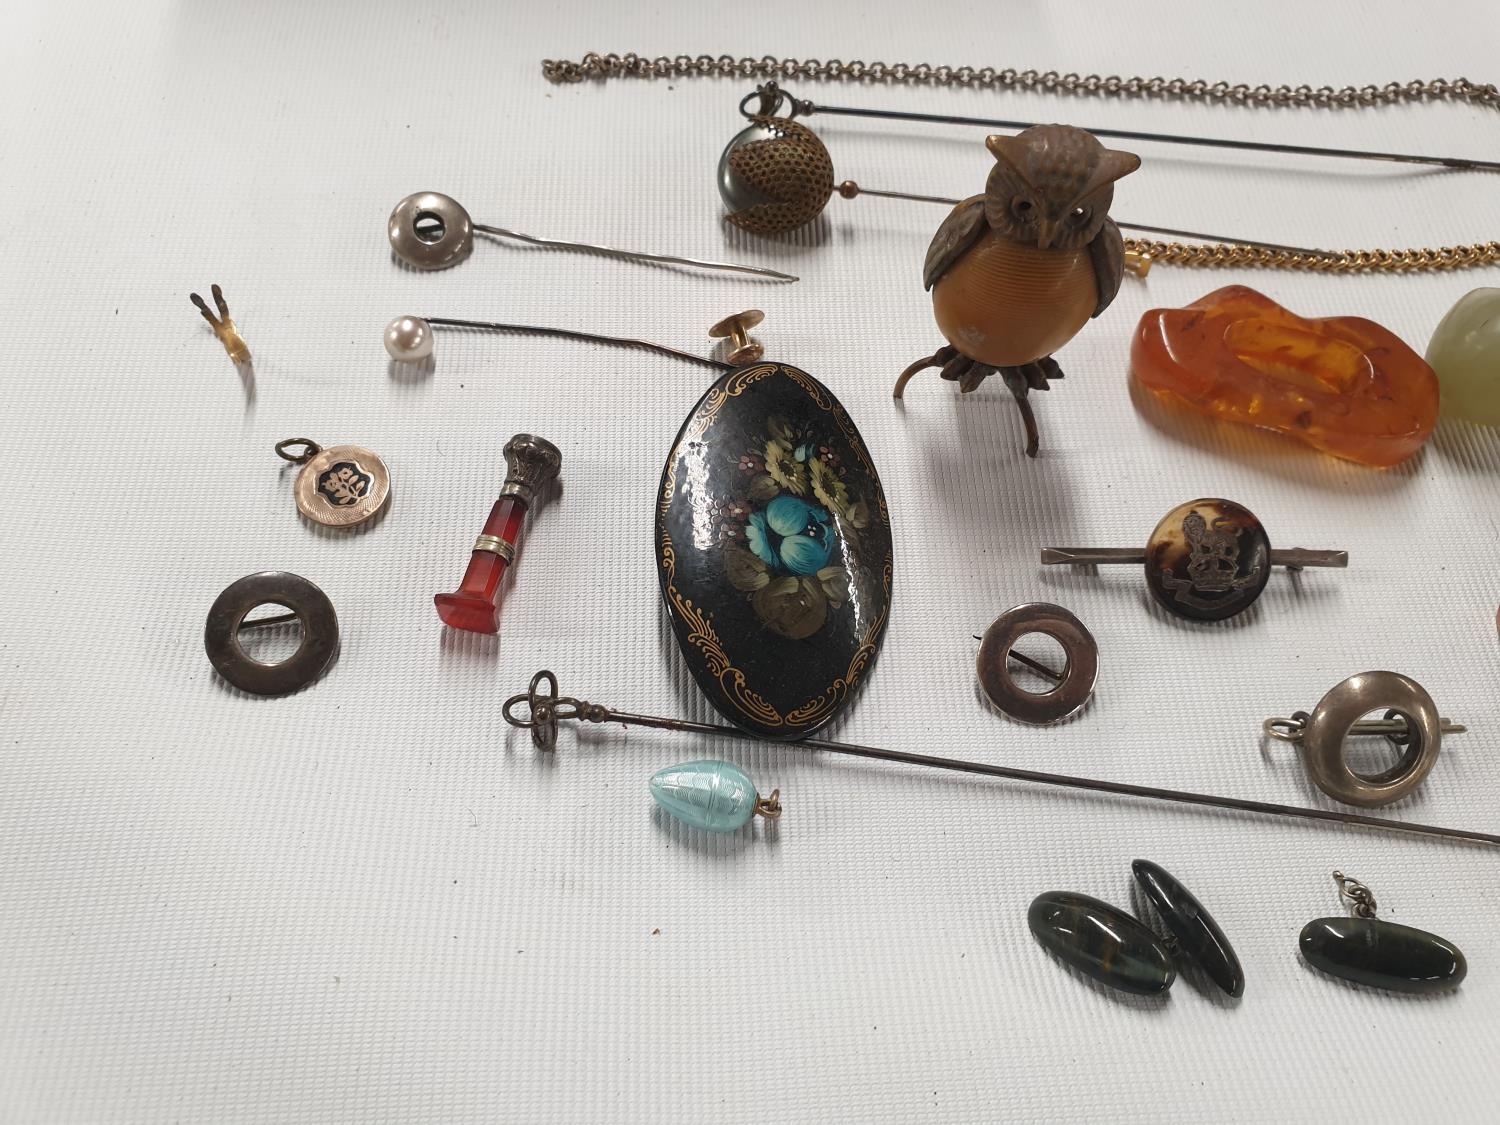 A quantity of Hat Pins, Brooches and other items, some silver and gold. - Image 2 of 3